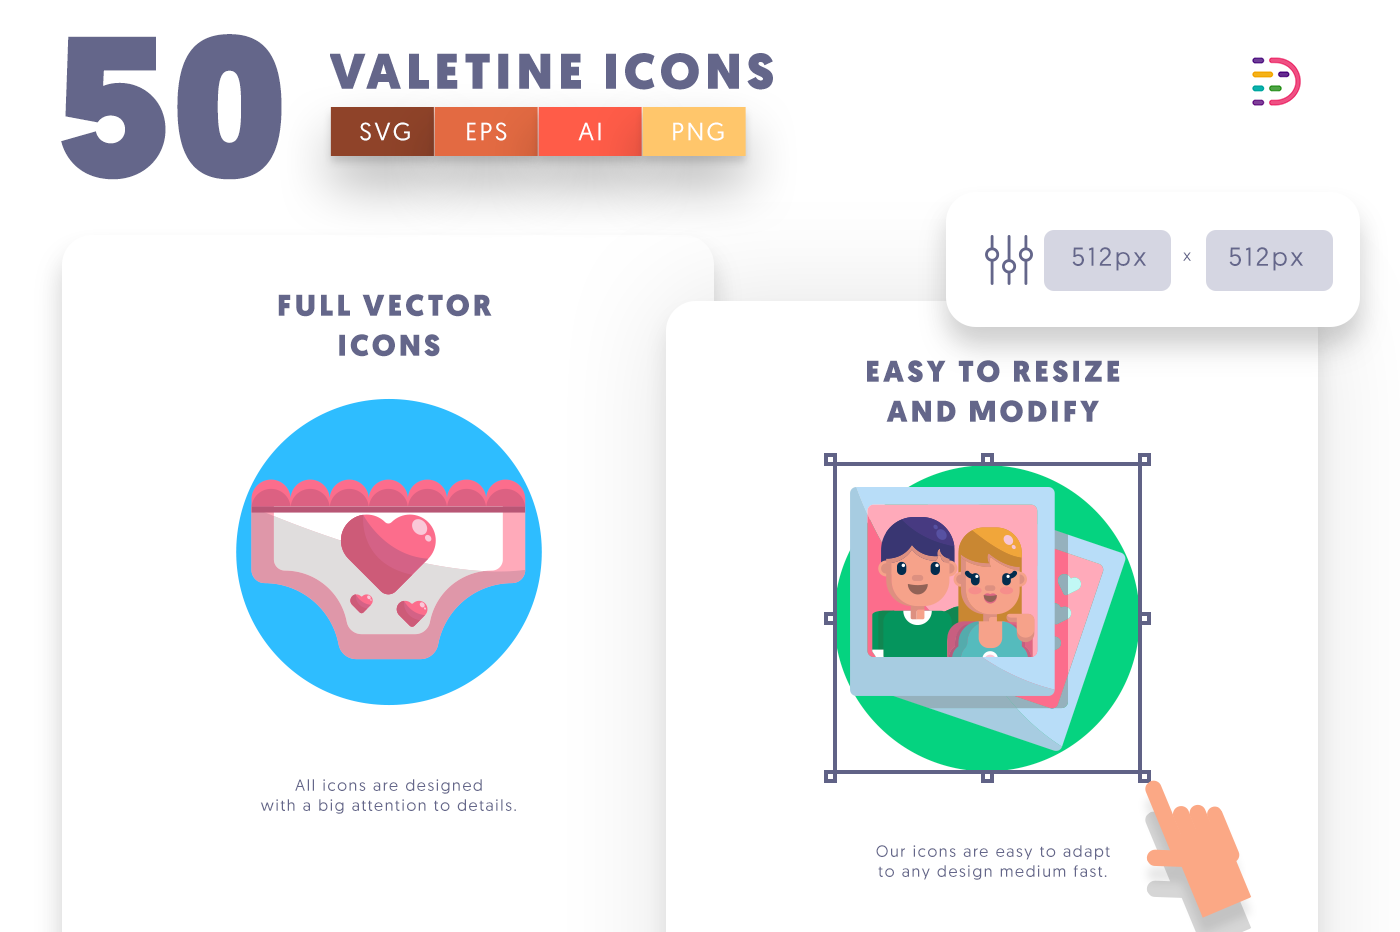 Valentines Icons with colored backgrounds